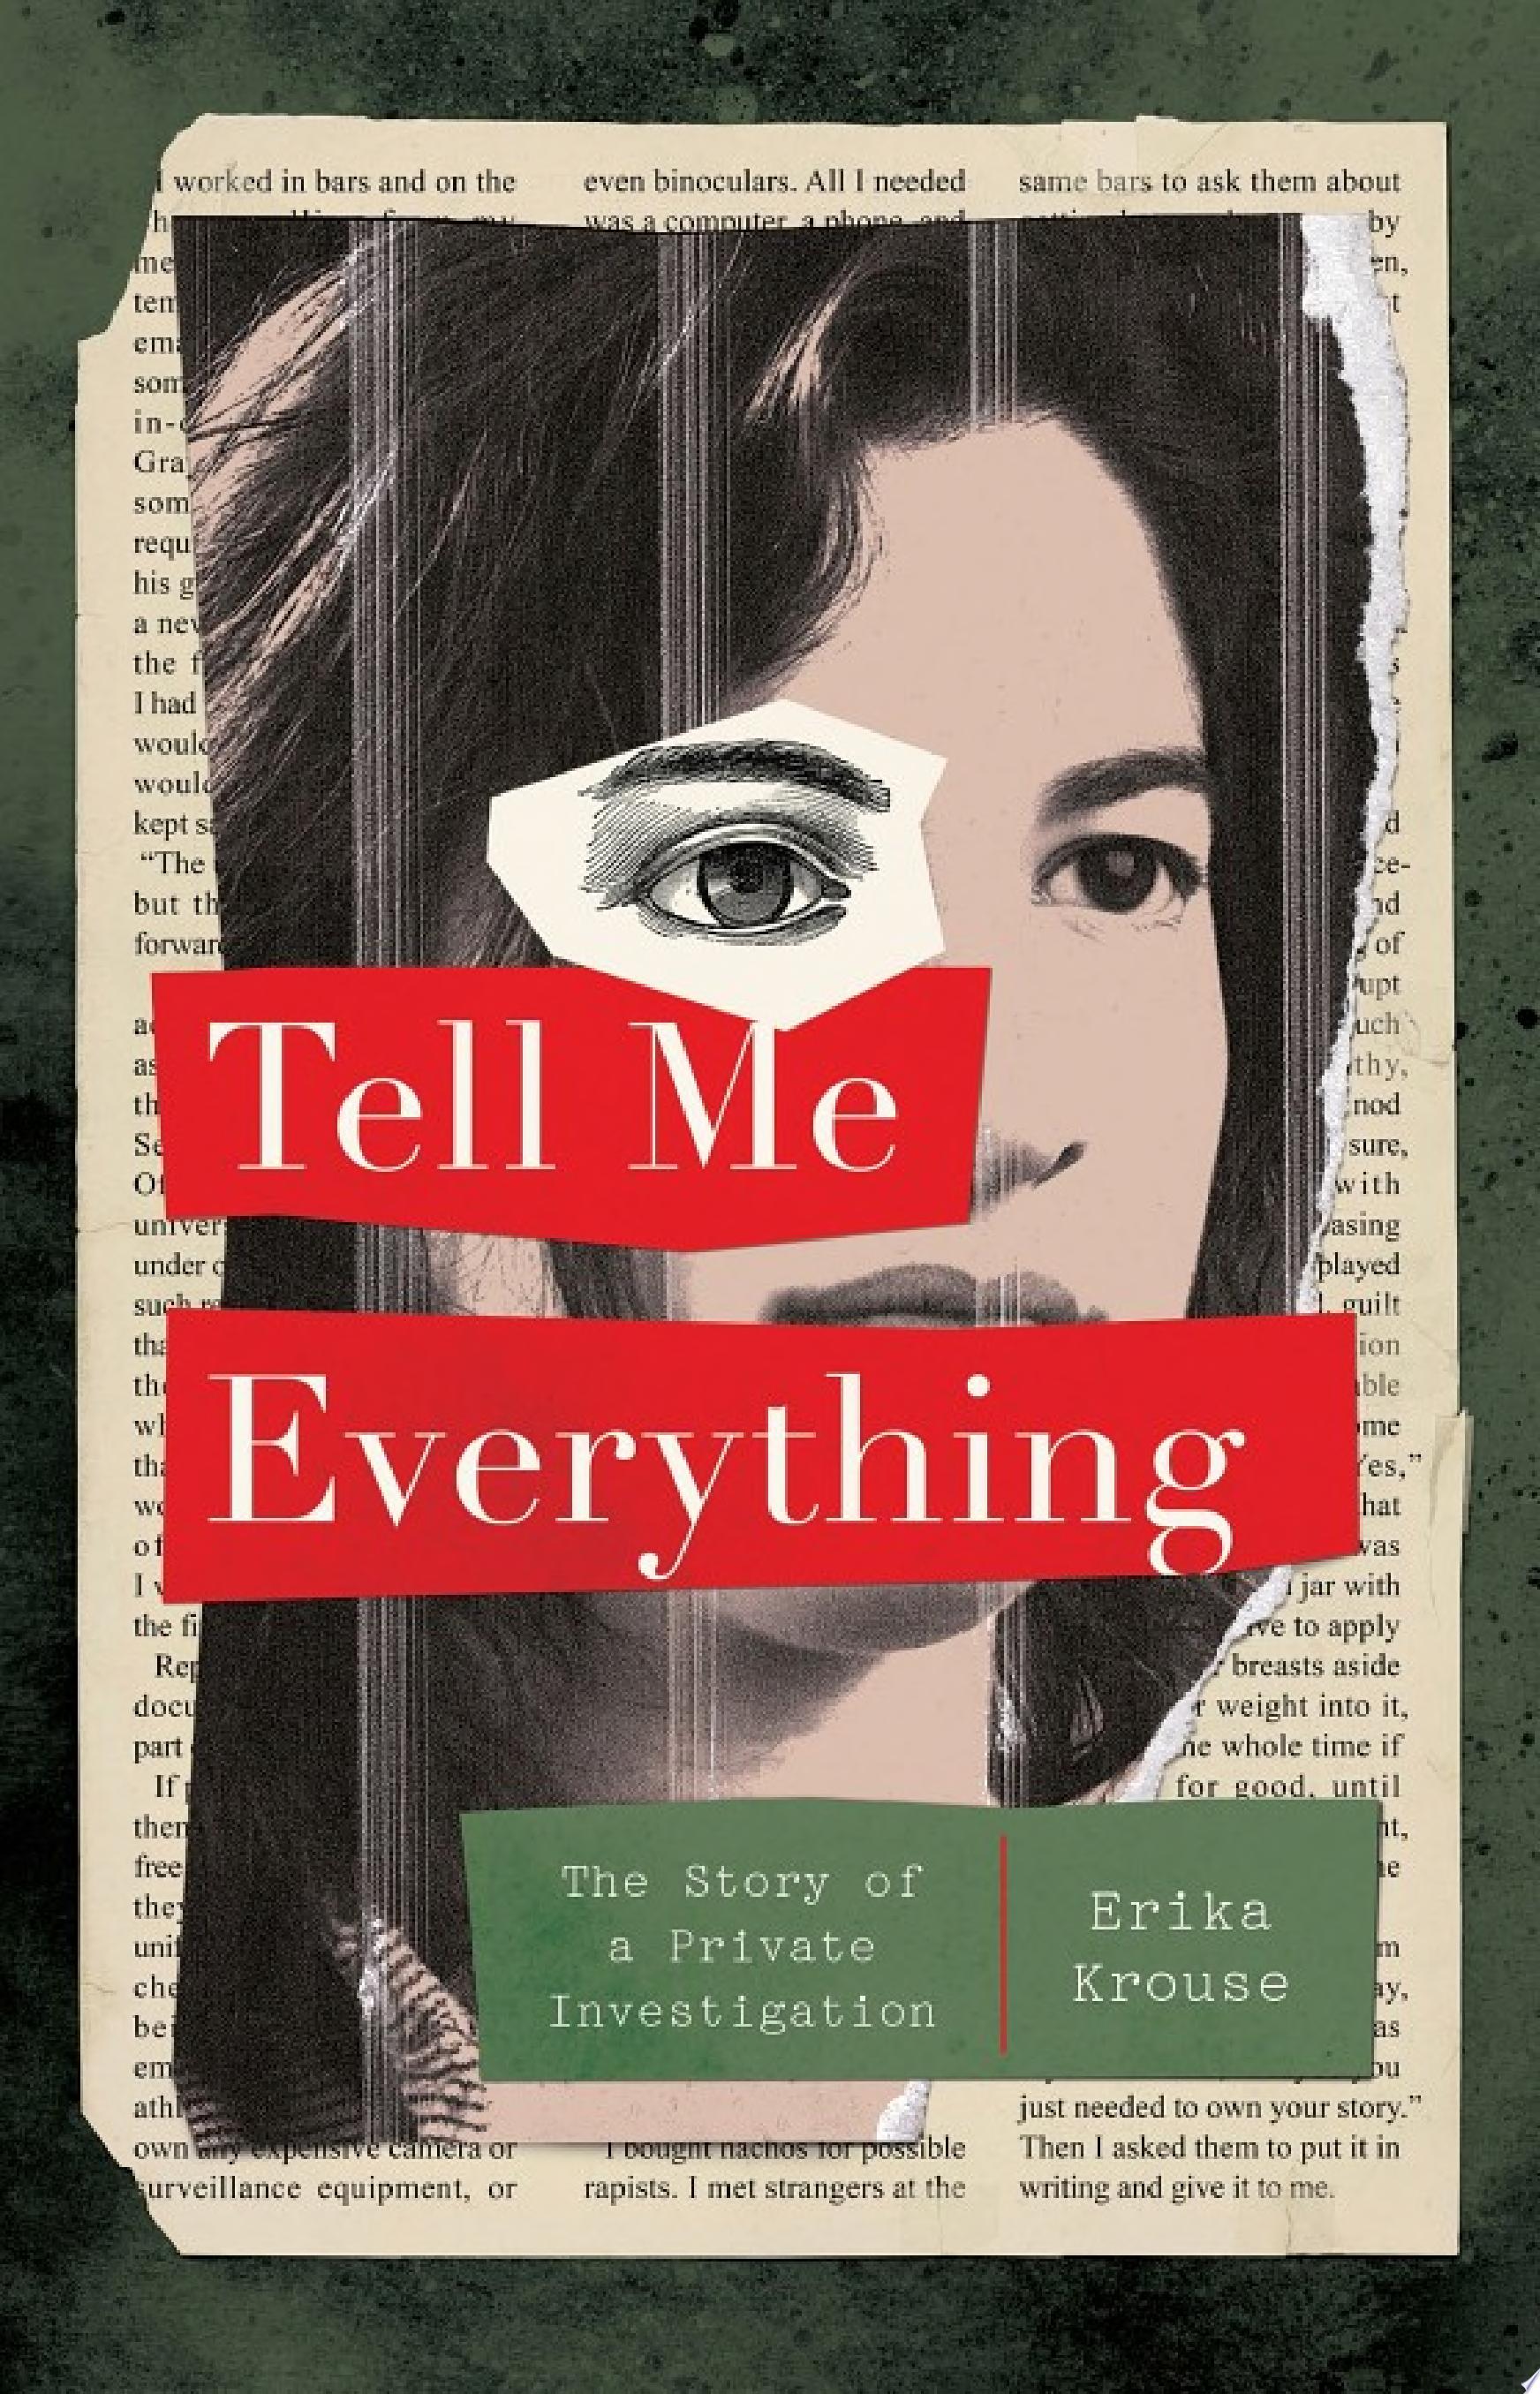 Image for "Tell Me Everything"